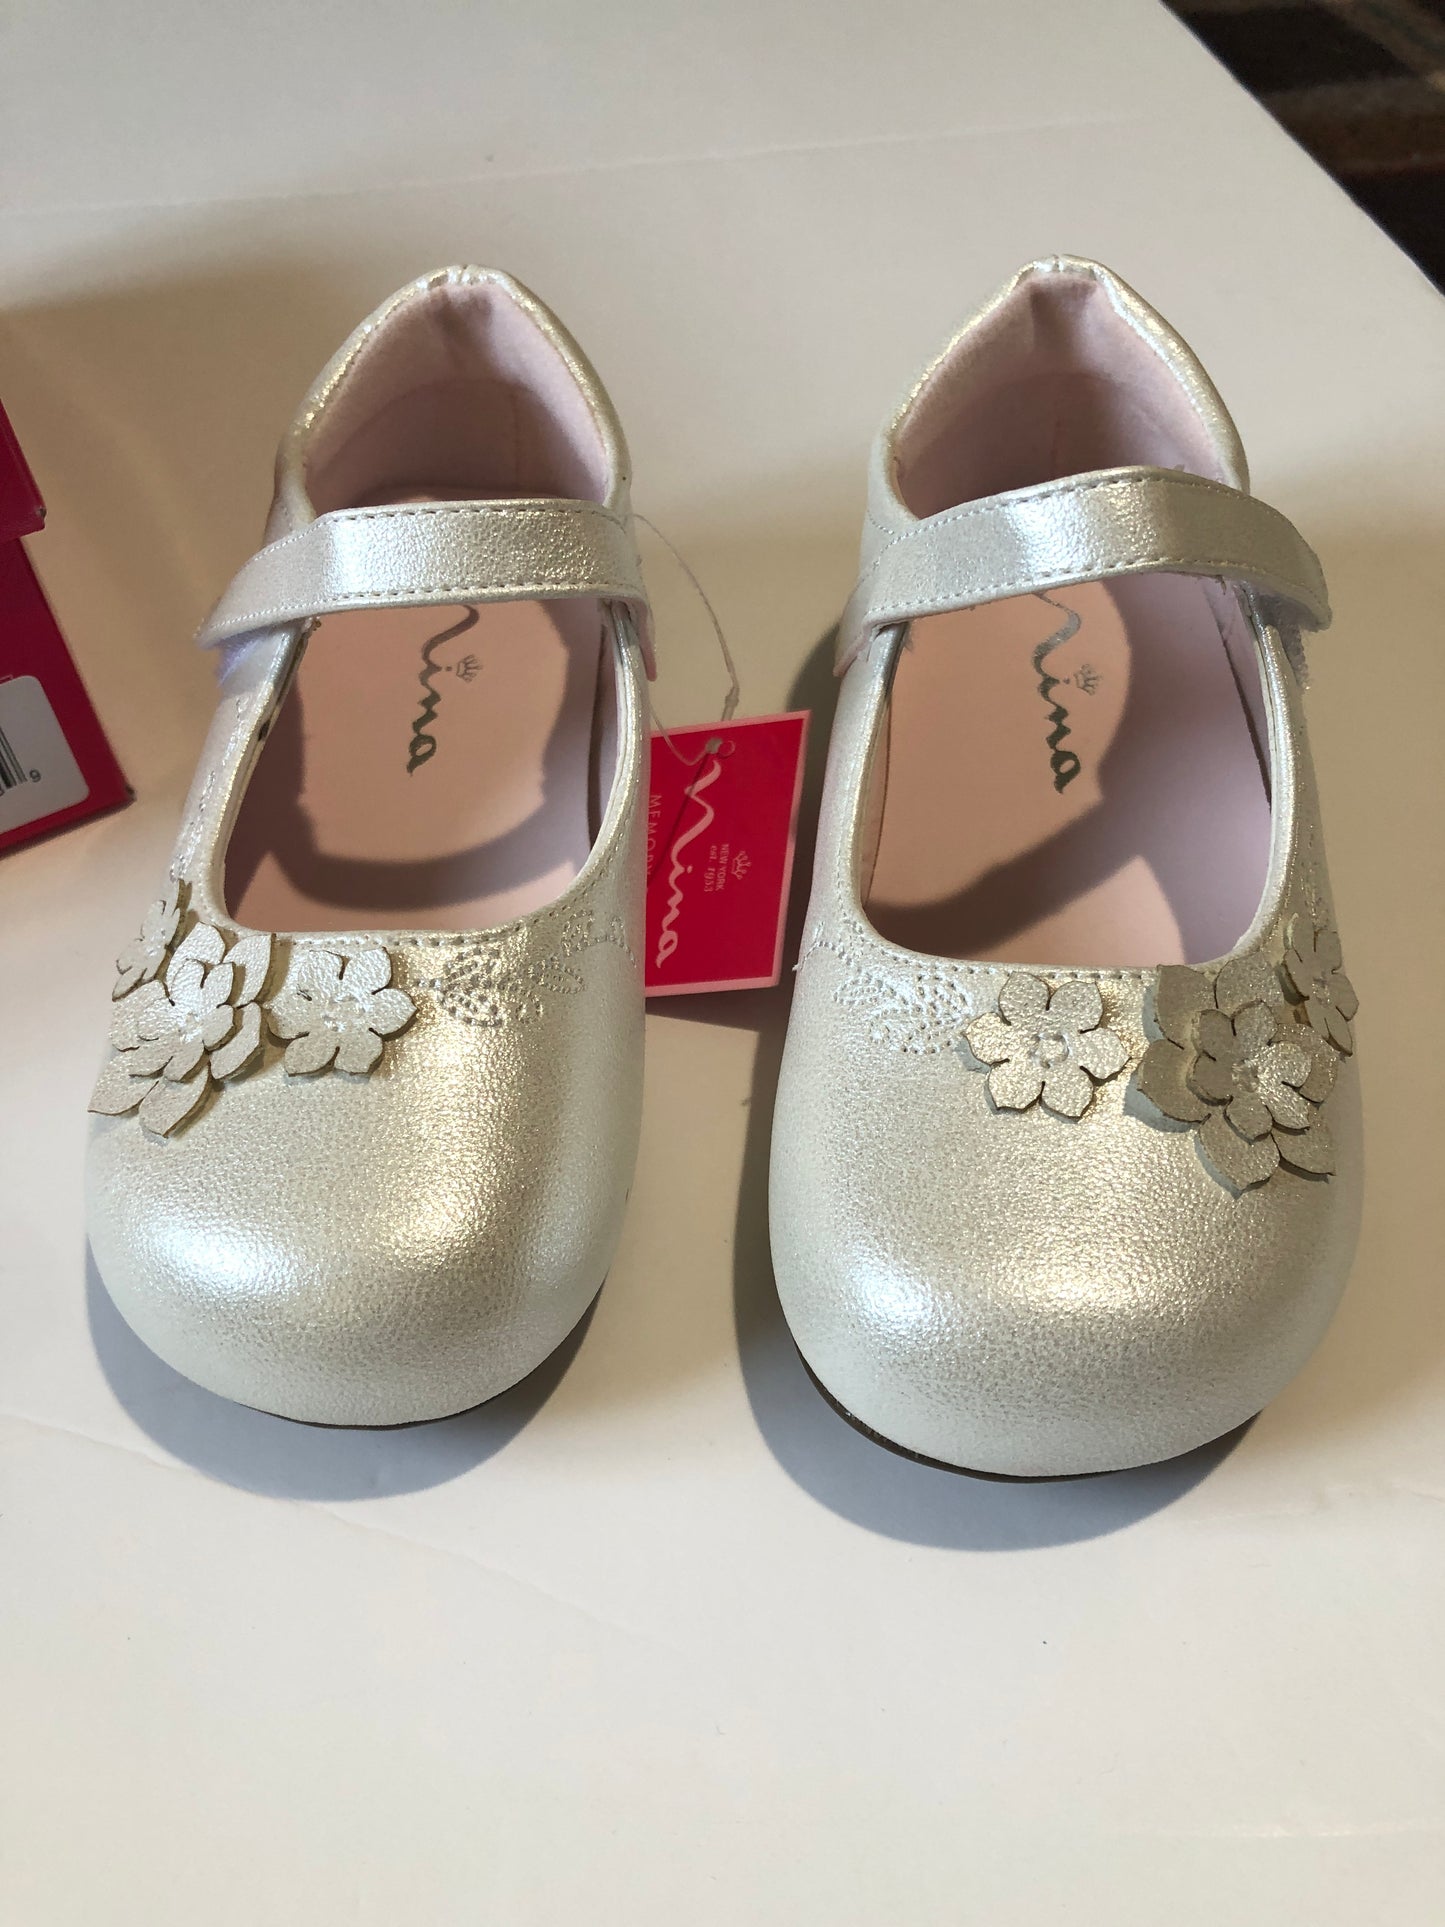 Reduced Girls size 8 shoes Nina white shimmer shoes new